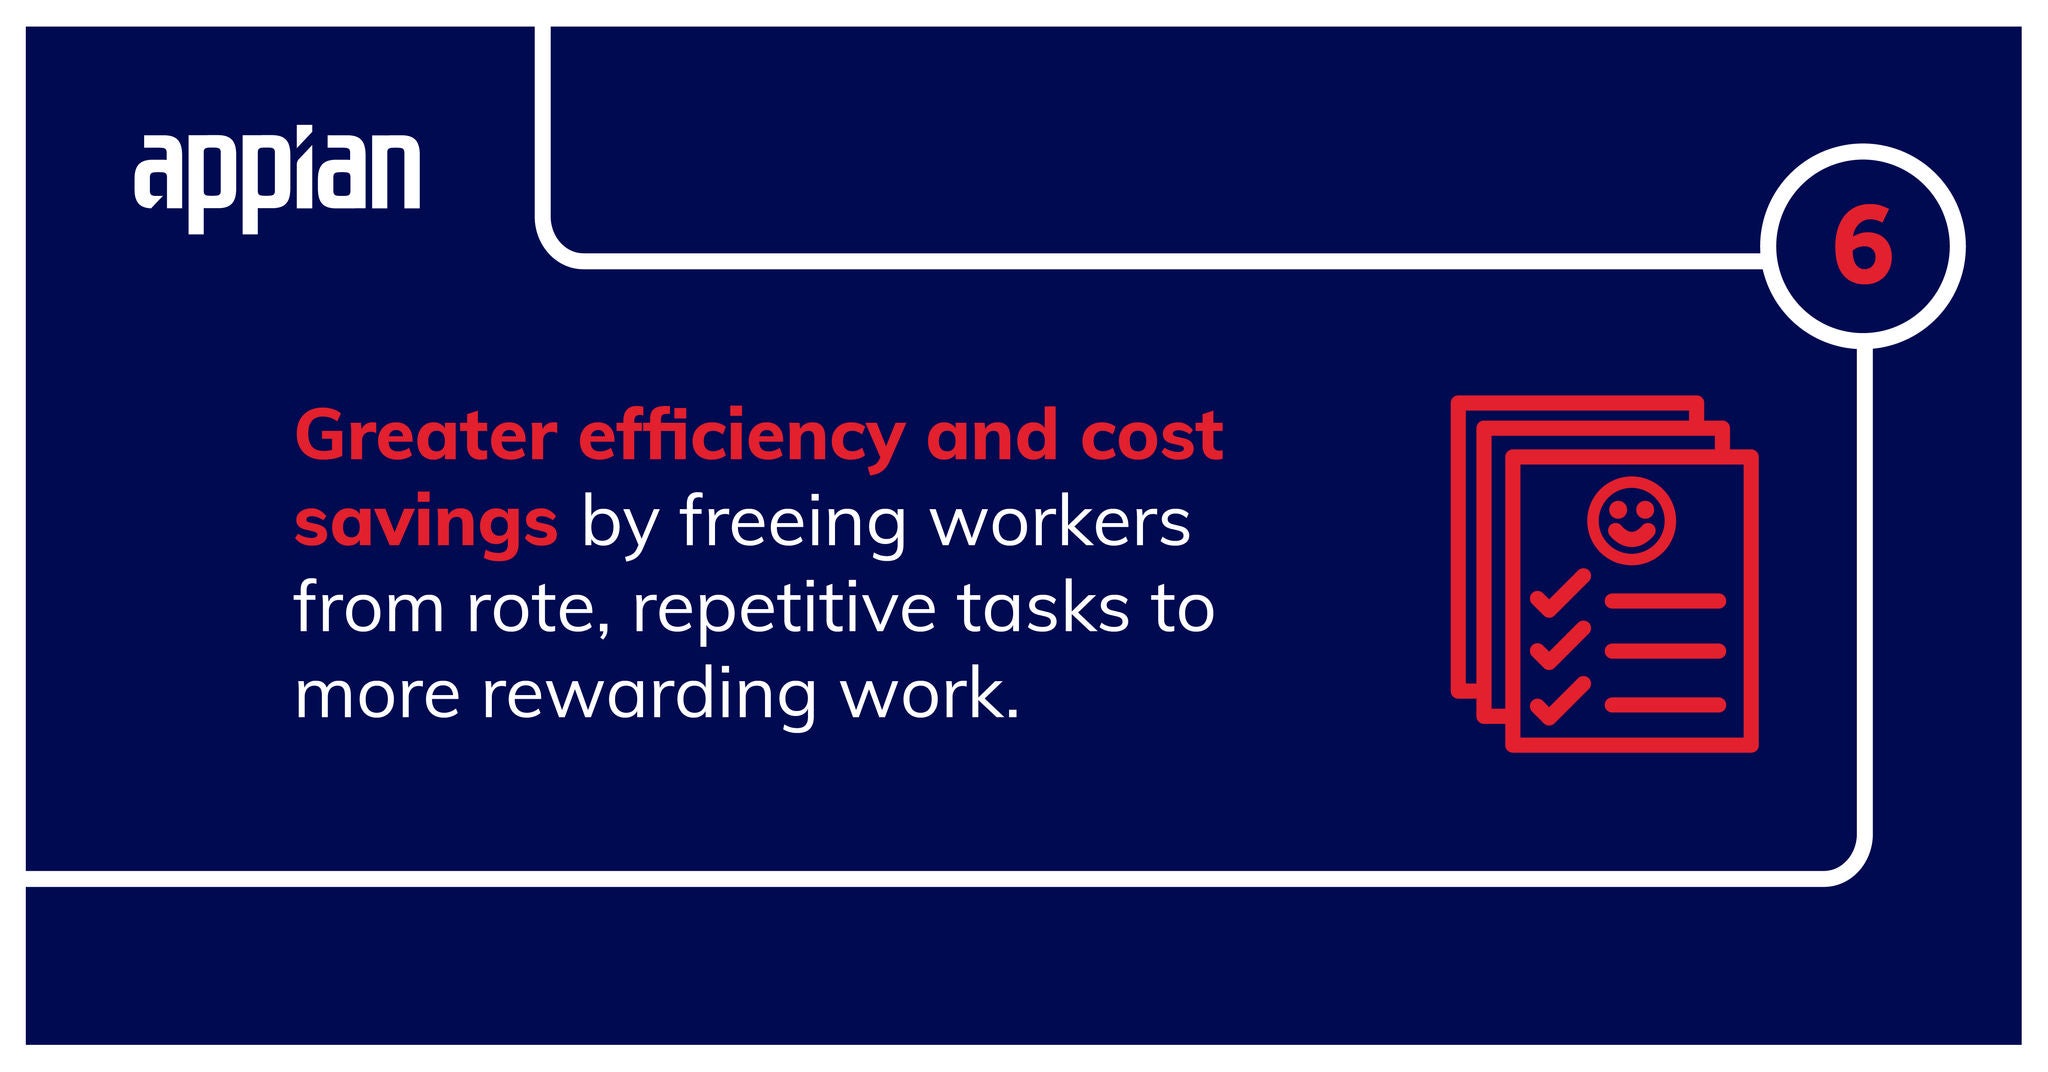 Higher employee satisfaction and productivity by freeing workers from rote, repetitive tasks.